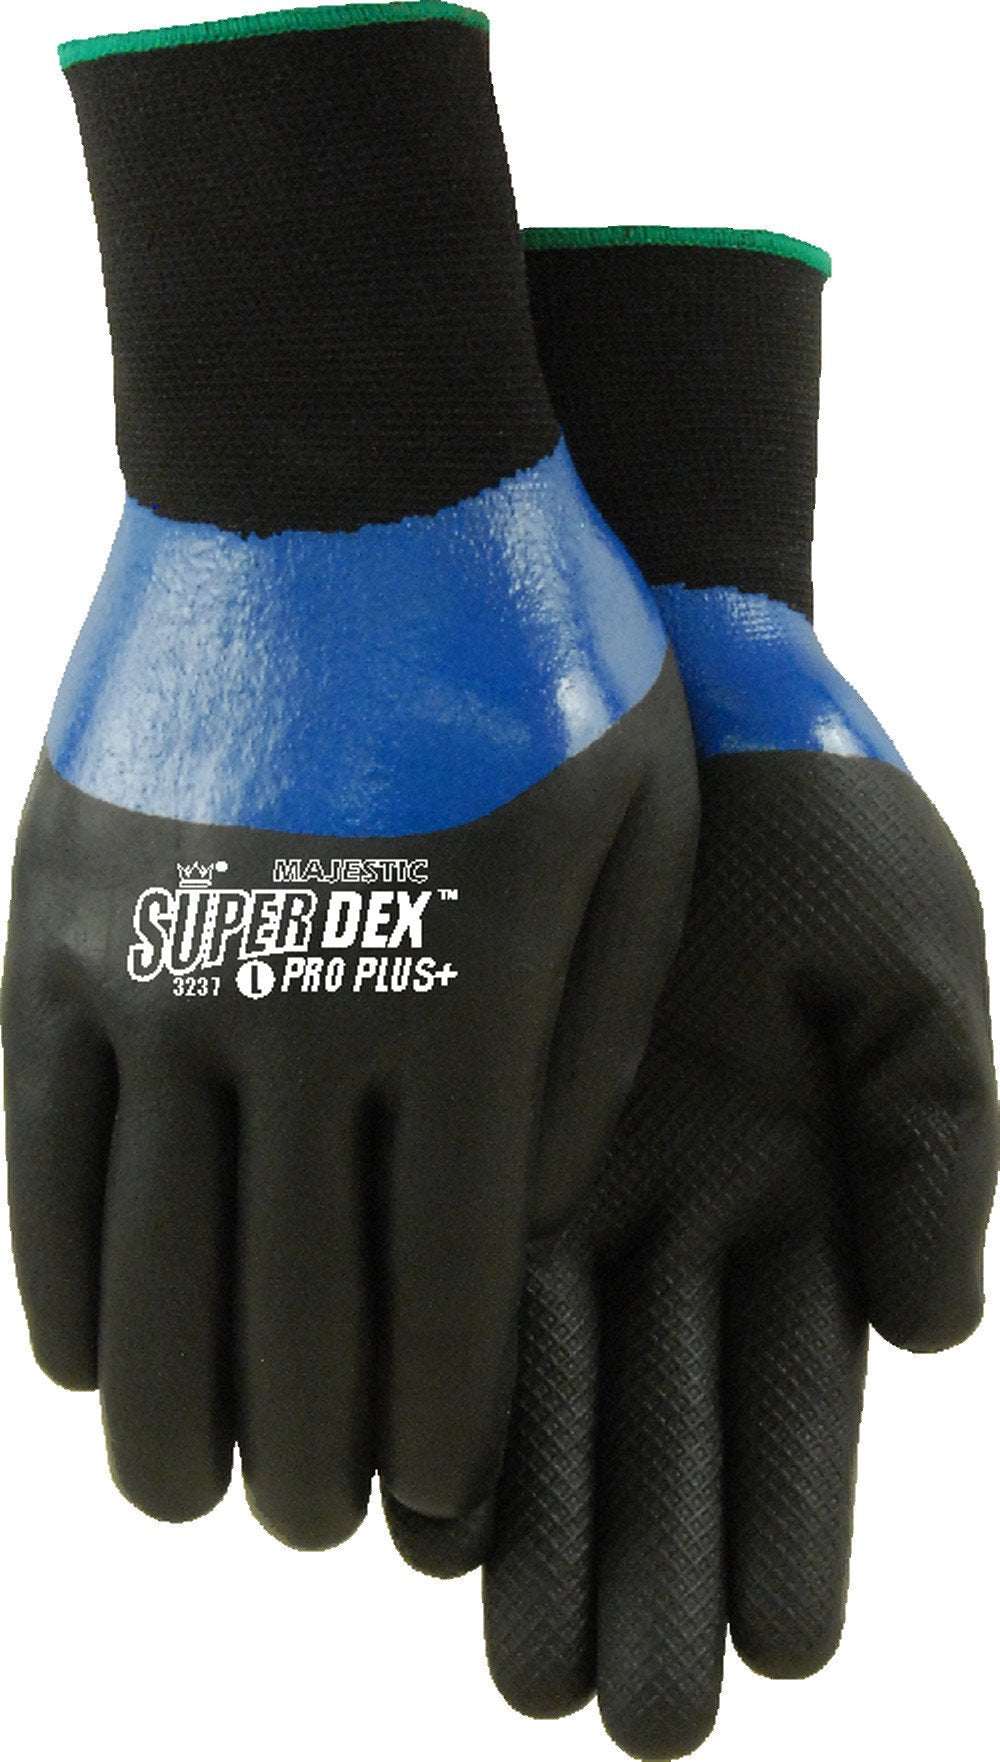 Majestic Synthetic Superdex Glove - Work World - Workwear, Work Boots, Safety Gear